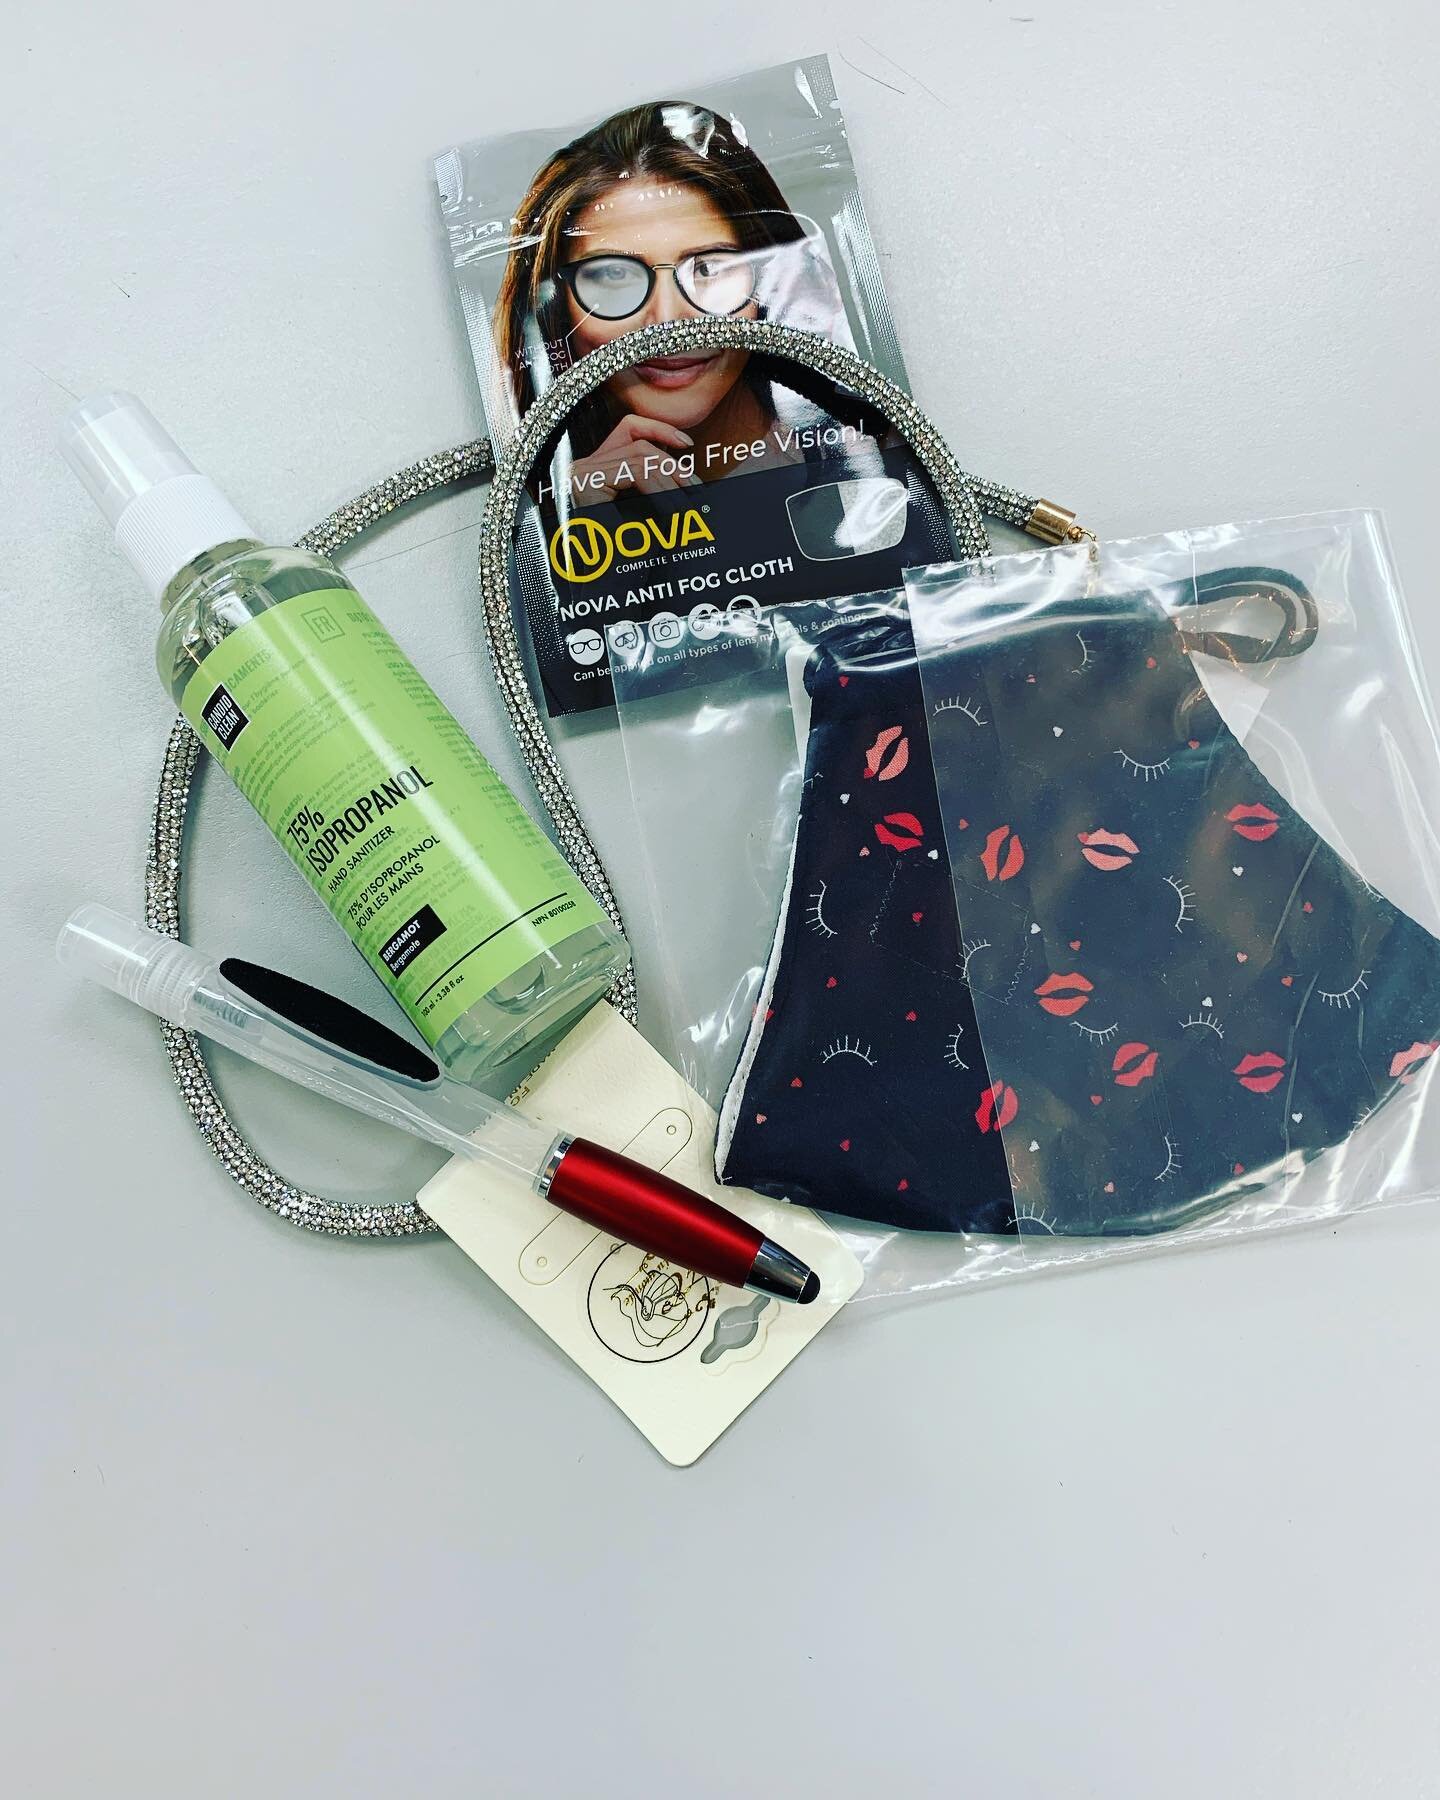 We have your essential stocking stuffers this year! Masks, mask chains, anti-fog cloths, scented sanitizer and a pen to keep your sanitizer in! While supplies last! #shoplocal #supportlocal #stockingstuffers #tistheseason #fashion #antifog #maskfashi